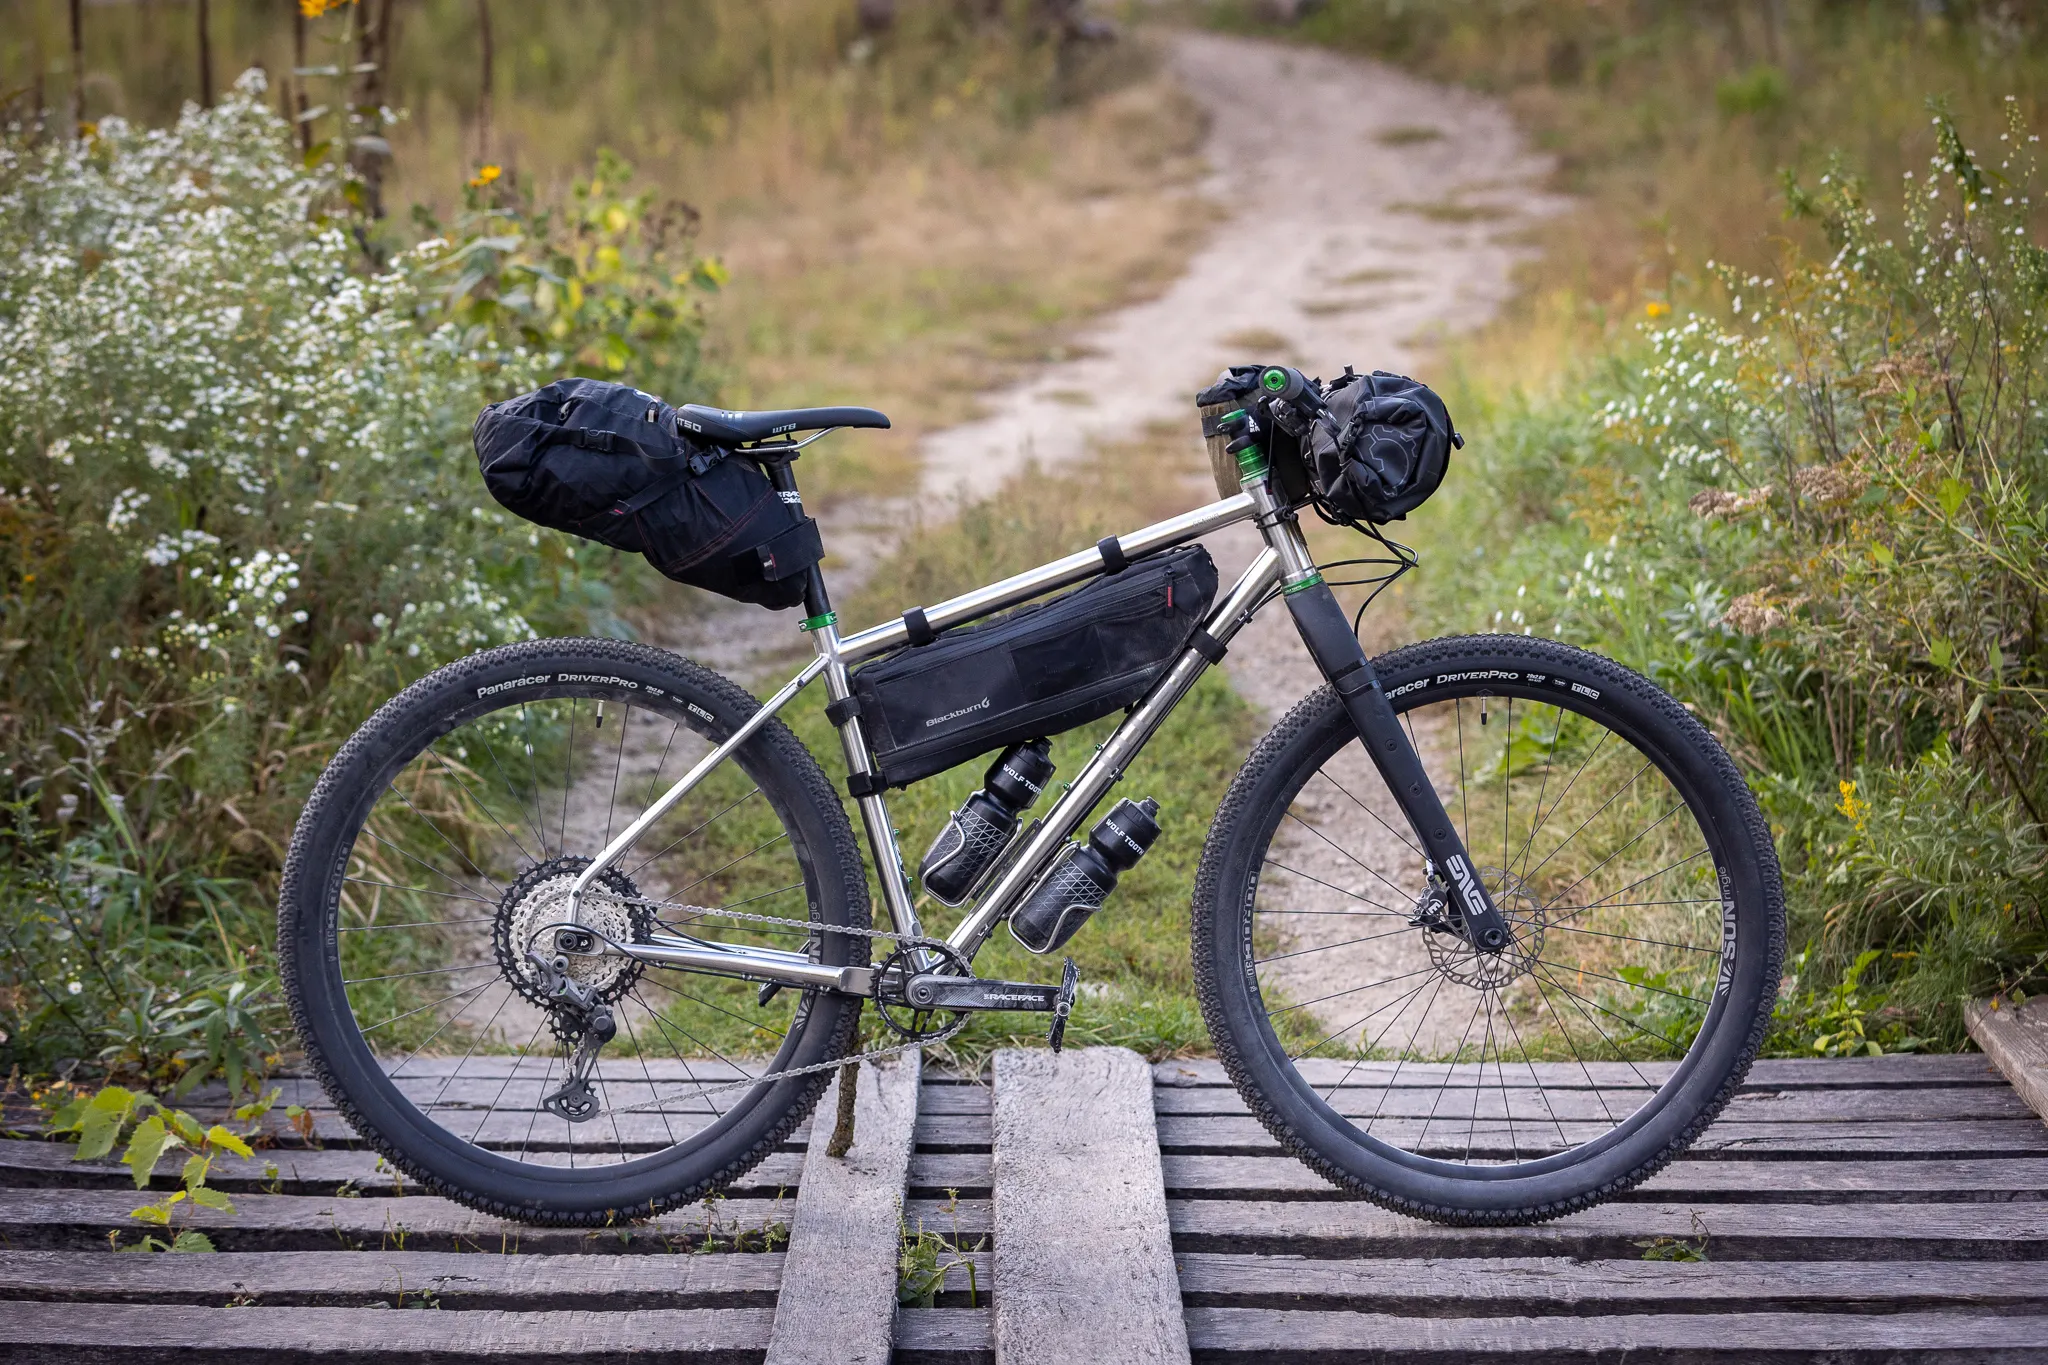 Otso Cycles Fenrir Stainless is a ride-anywhere bike for bikepacking races and afternoon adventures that can be built with drop bars or MTB bars.